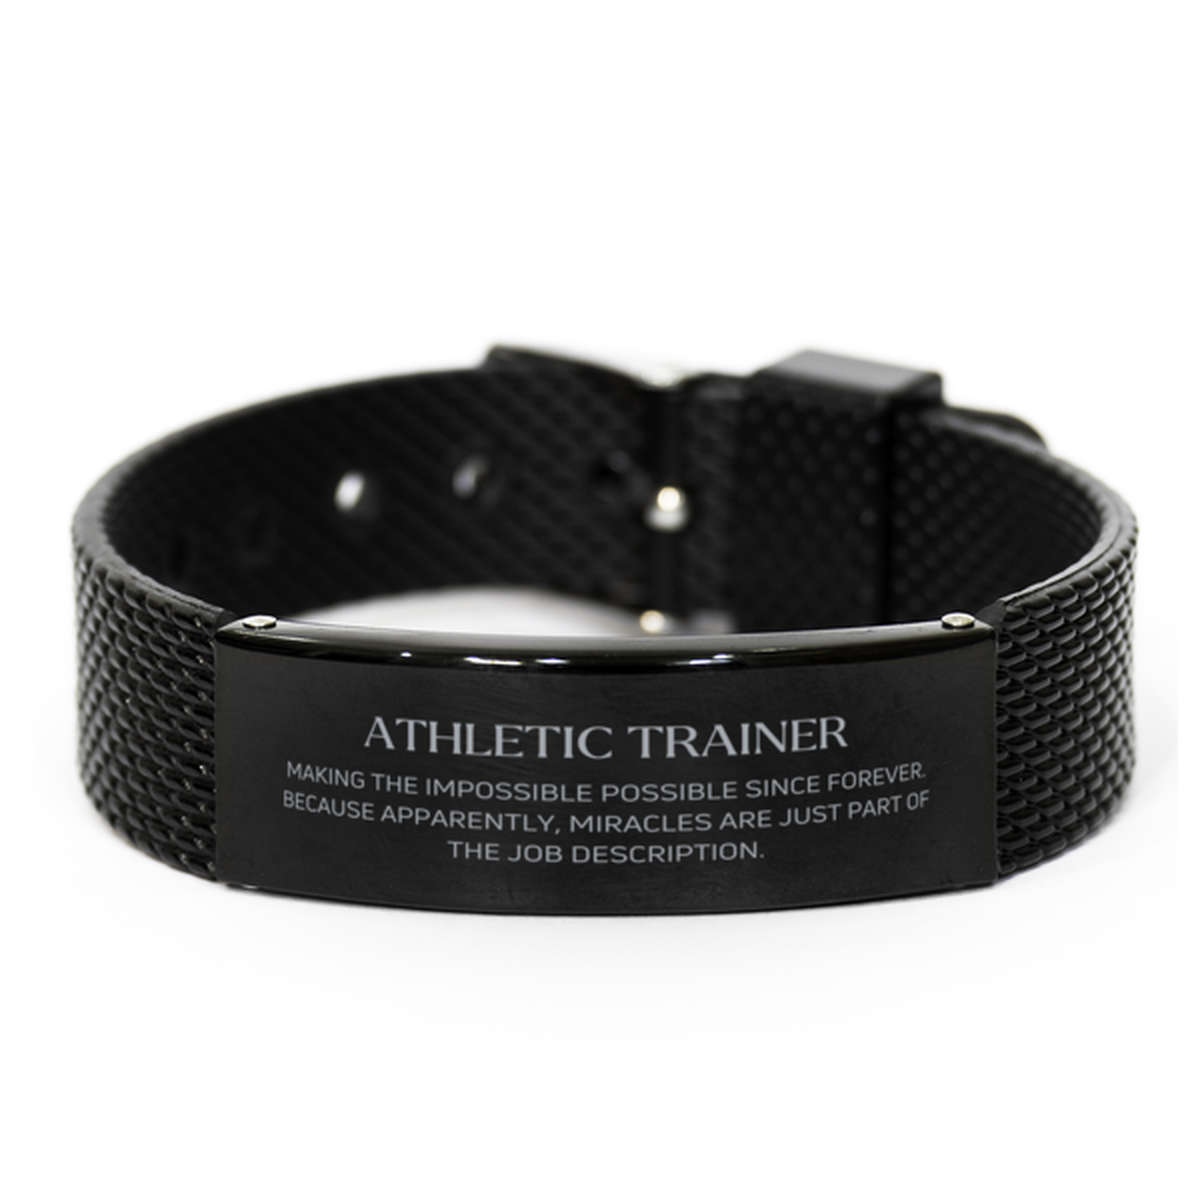 Funny Athletic Trainer Gifts, Miracles are just part of the job description, Inspirational Birthday Black Shark Mesh Bracelet For Athletic Trainer, Men, Women, Coworkers, Friends, Boss